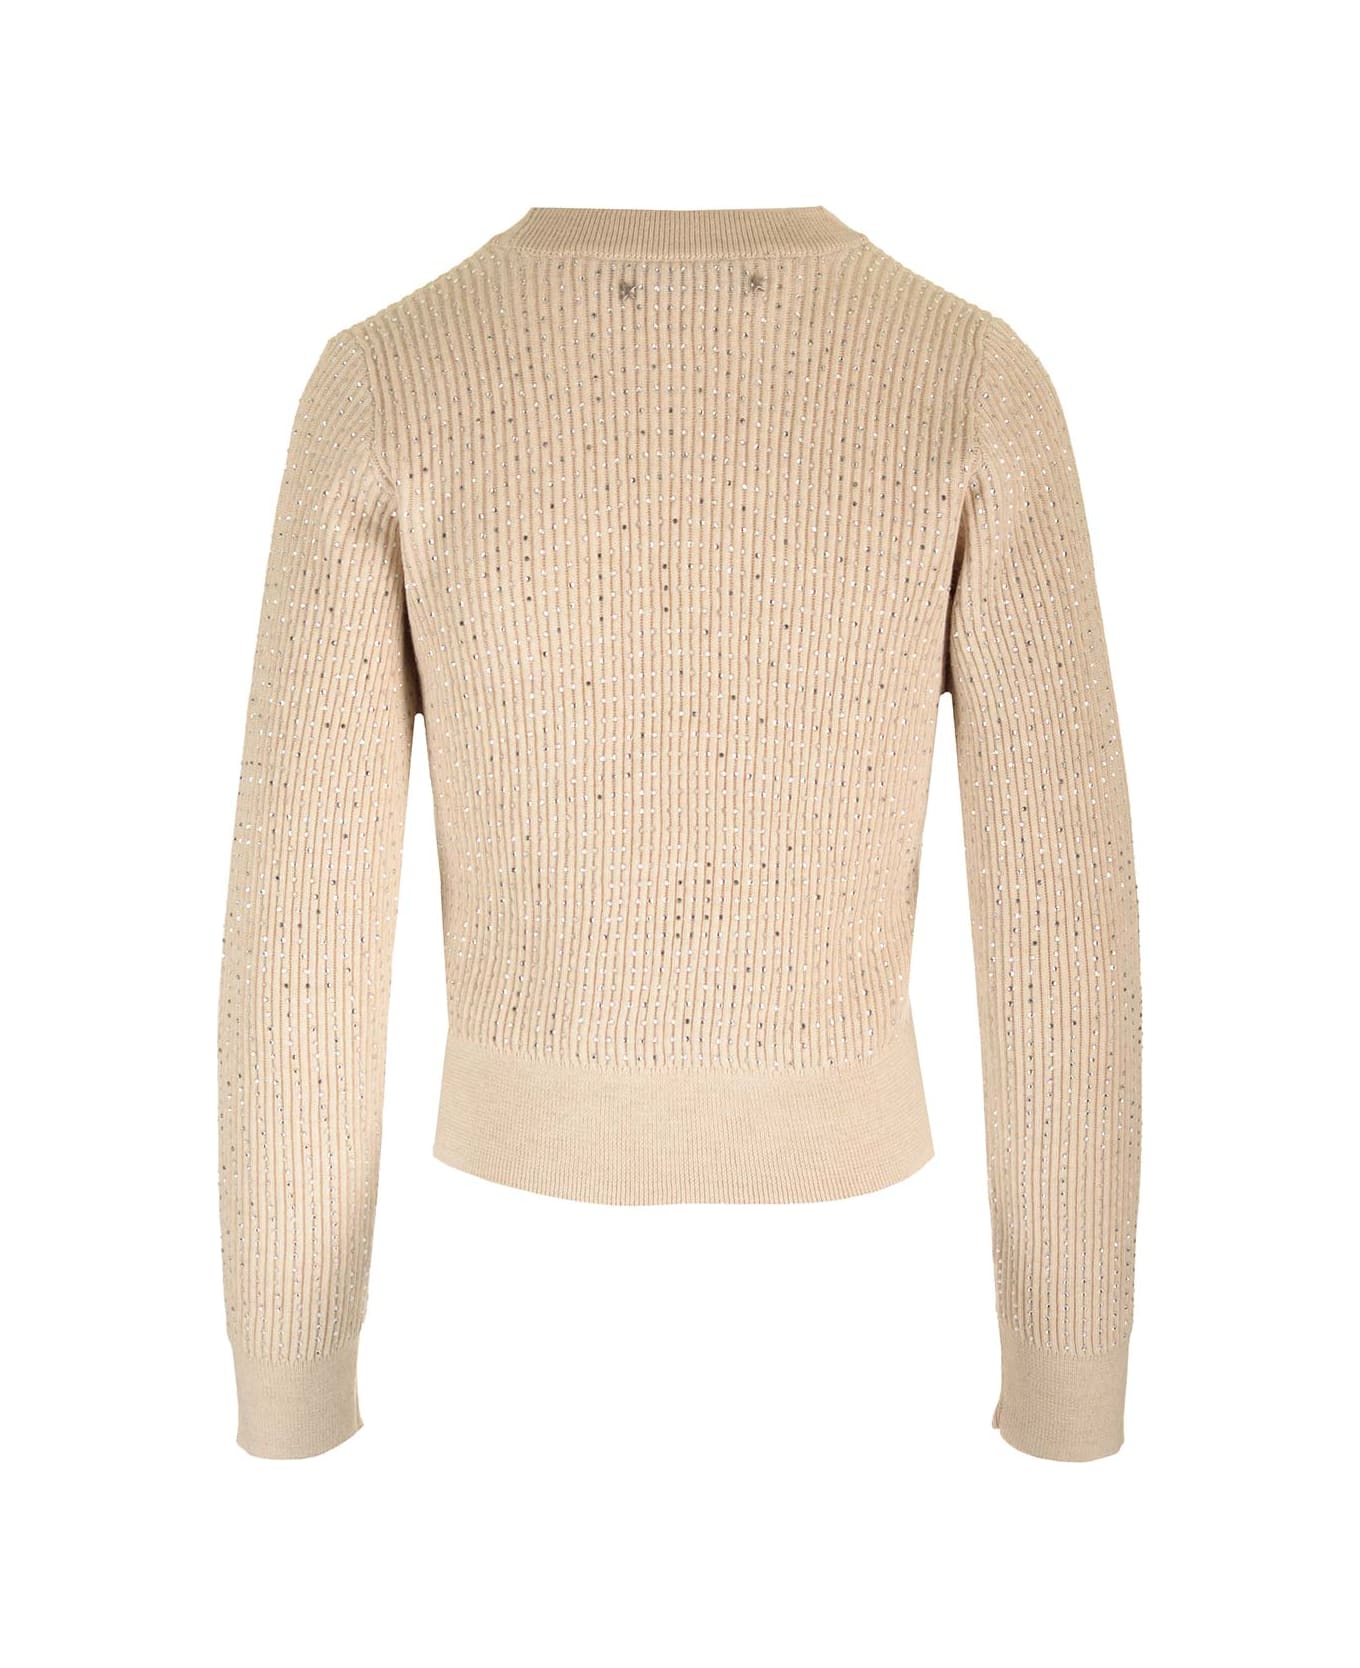 Golden Goose Ribbed Wool Sweater - Nude